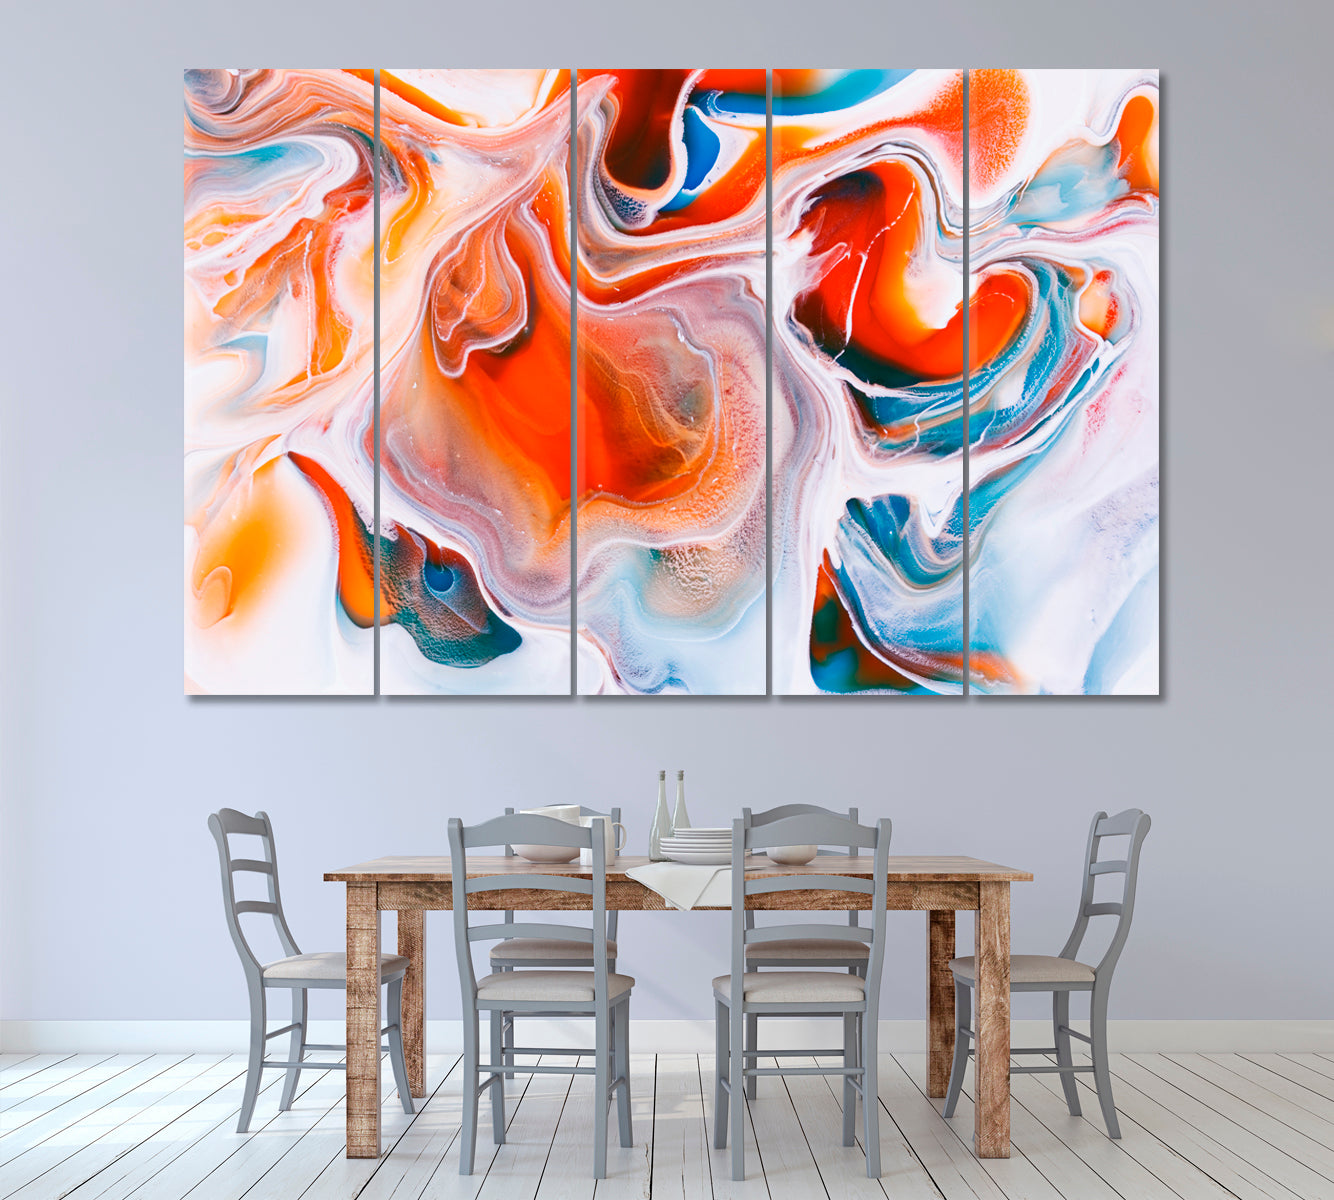 Bright Abstract Mix Paints Canvas Print ArtLexy 5 Panels 36"x24" inches 